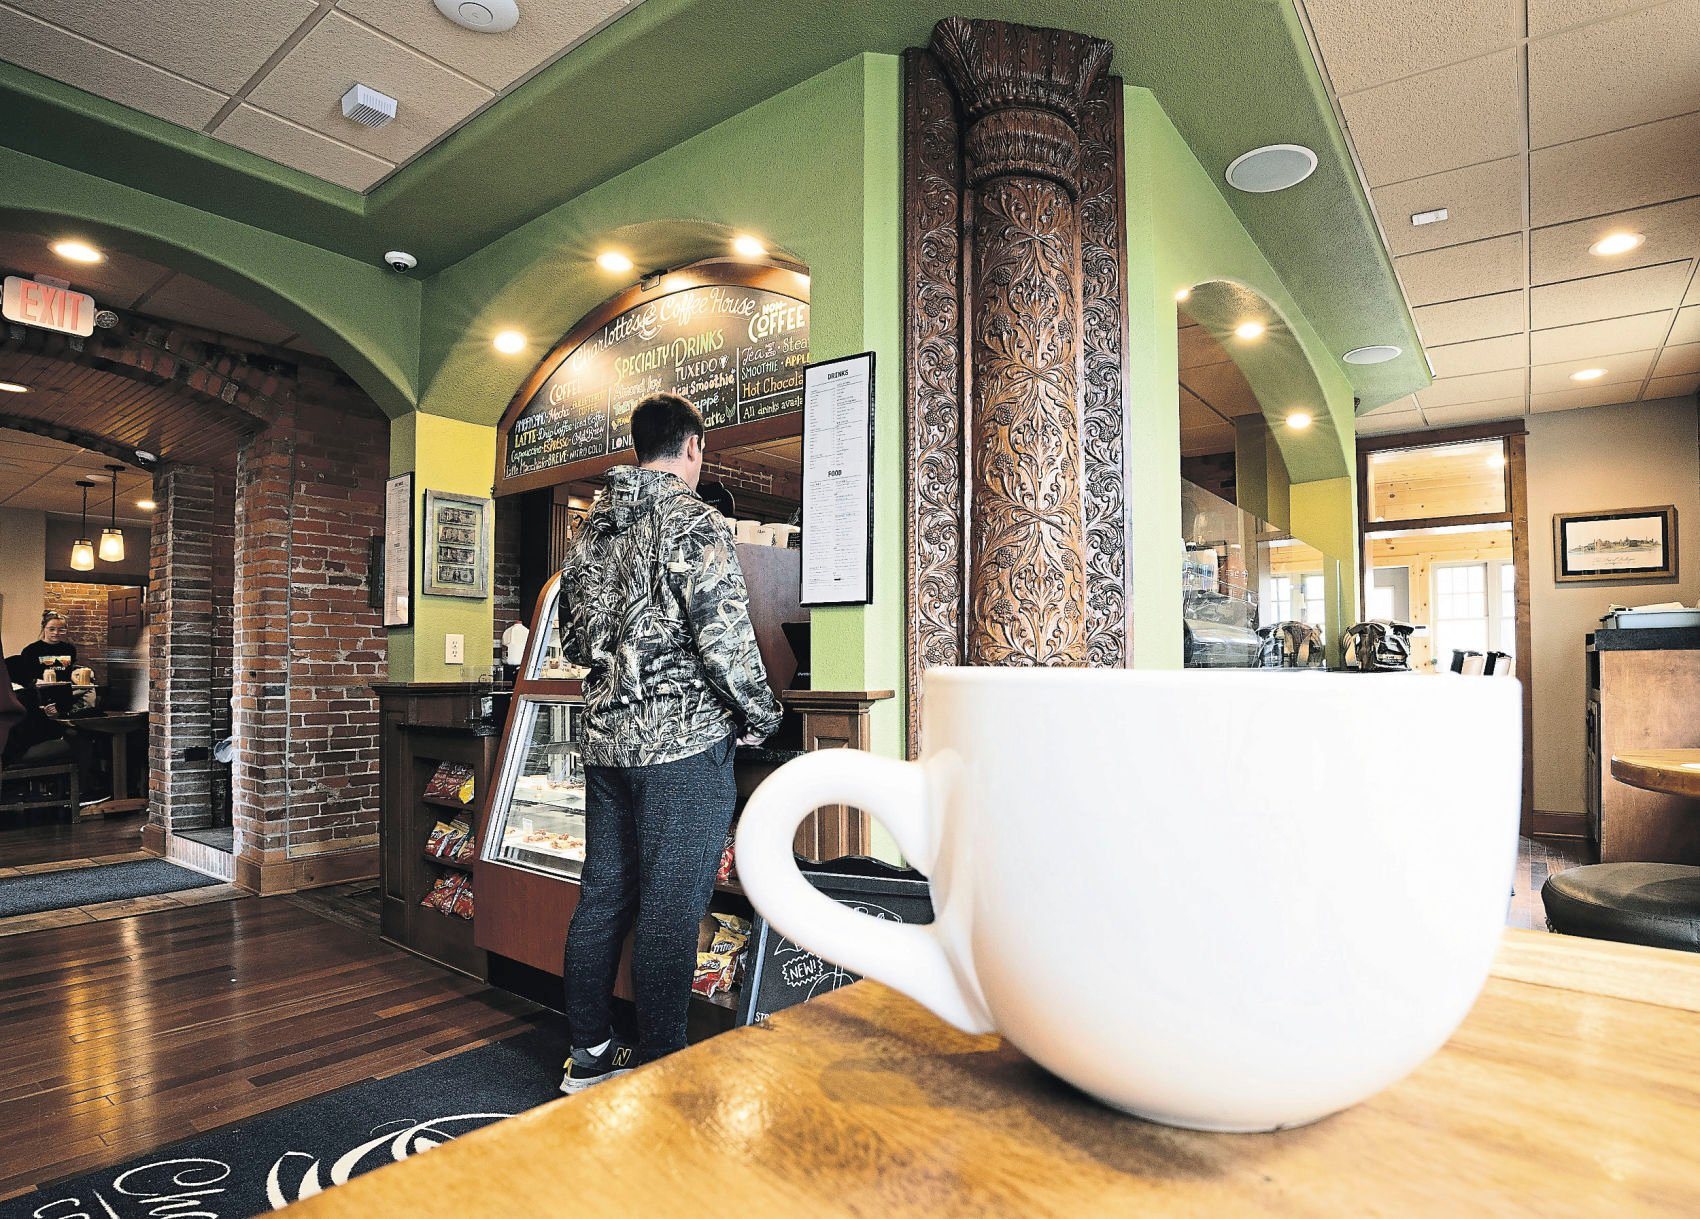 A customer looks over the menu at Charlotte’s Coffee House. It is one of the many locally owned coffee shops in Dubuque.    PHOTO CREDIT: Stephen Gassman